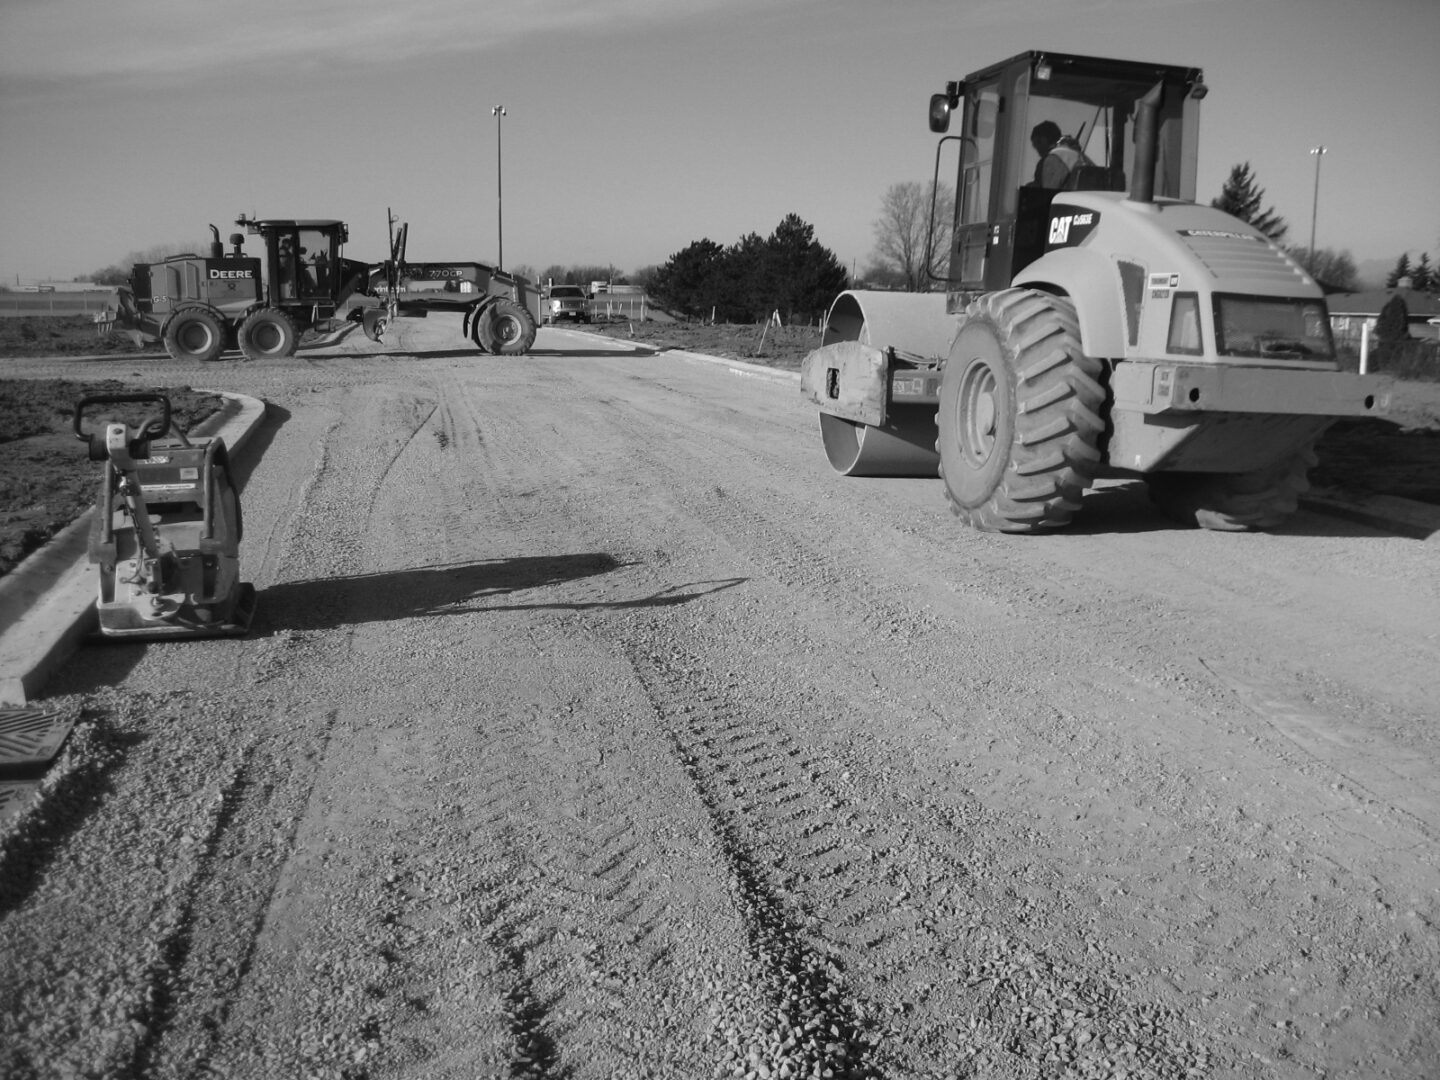 A black and white photo of tractors on the road.